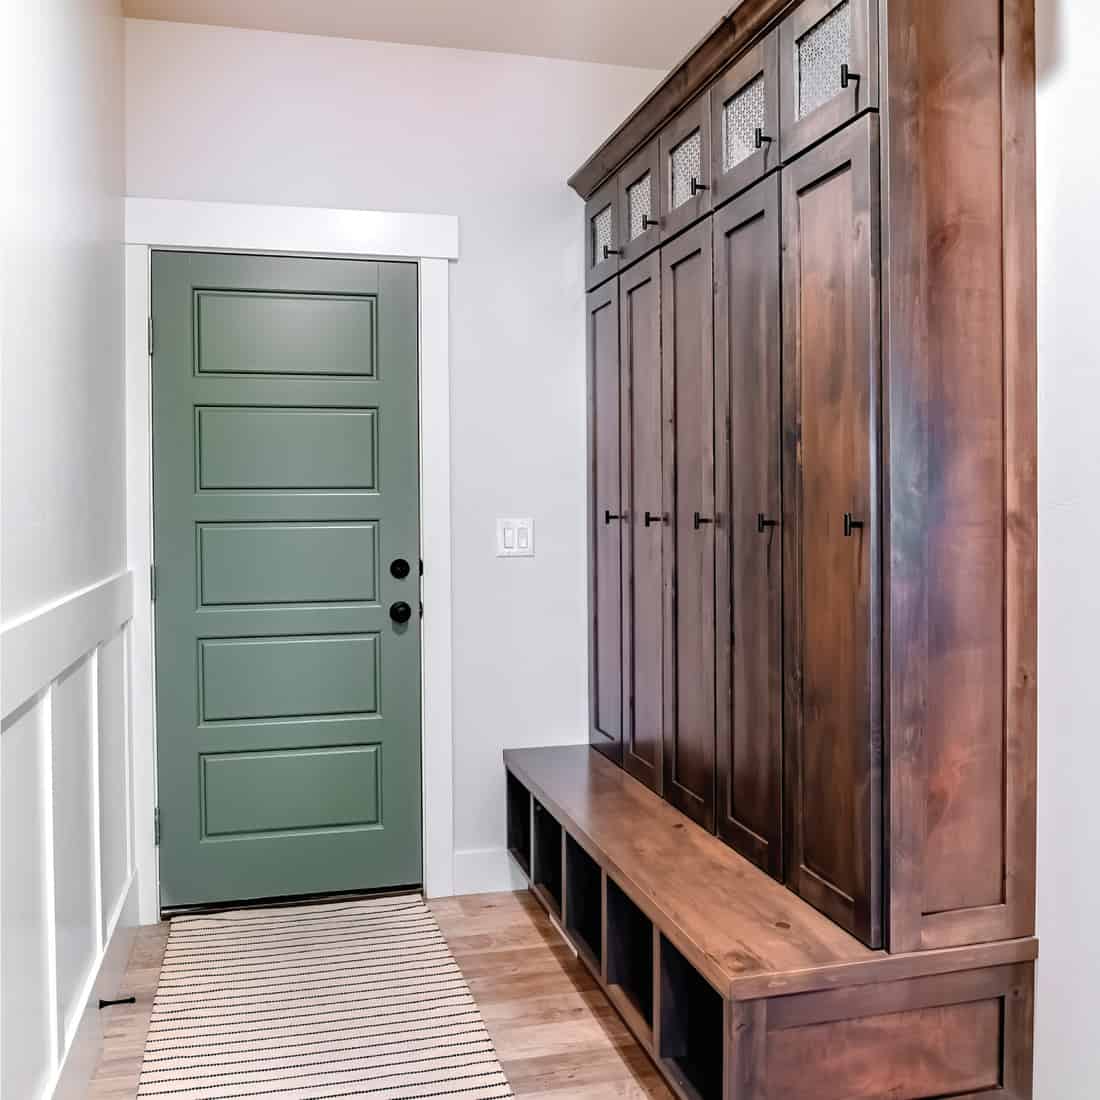 Long and narrow foyer rug inside a home with large cabinet on the side